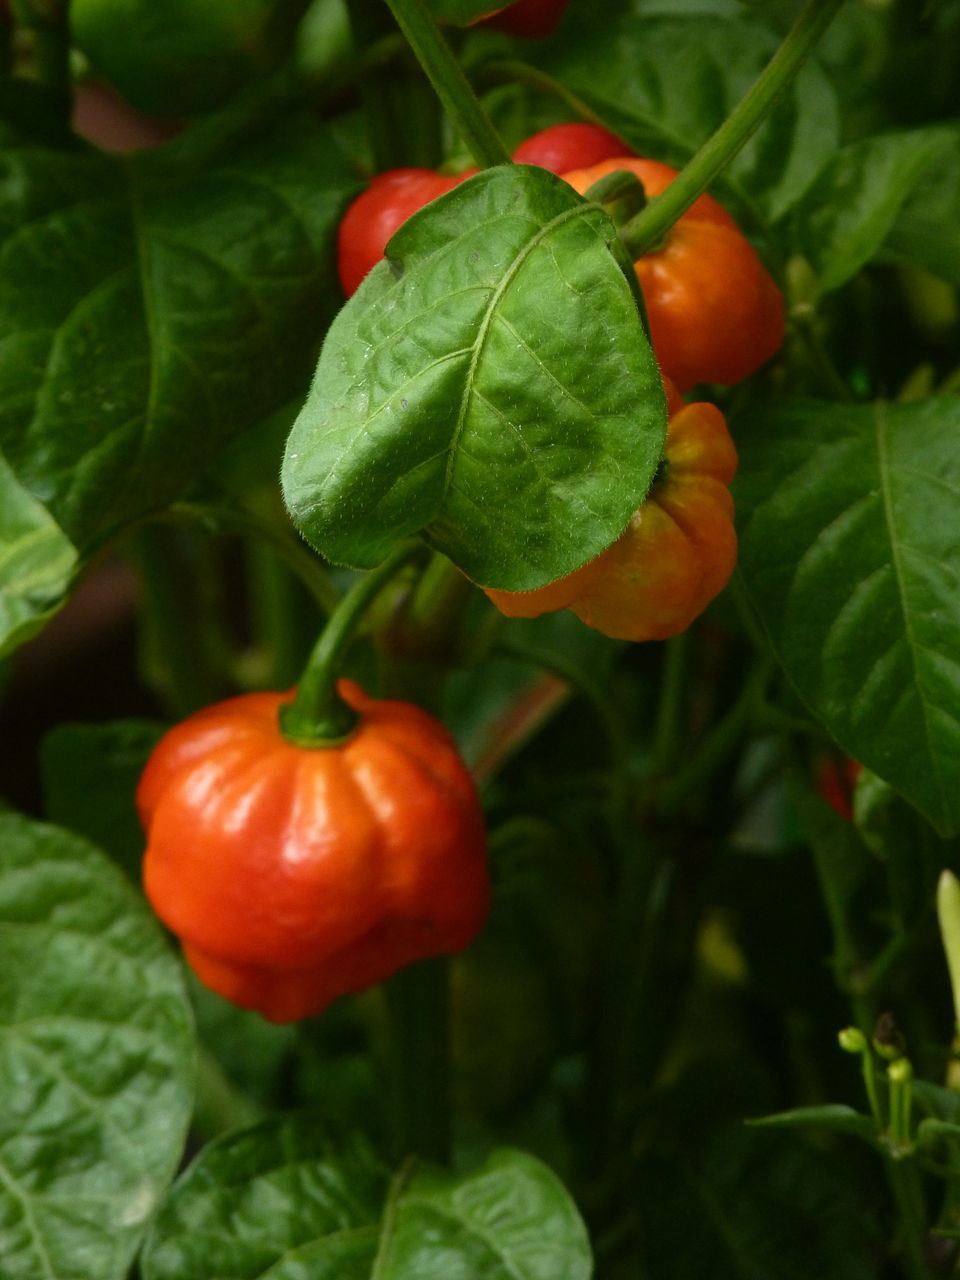 CLOSE-UP OF FRESH TOMATOES ON PLANT